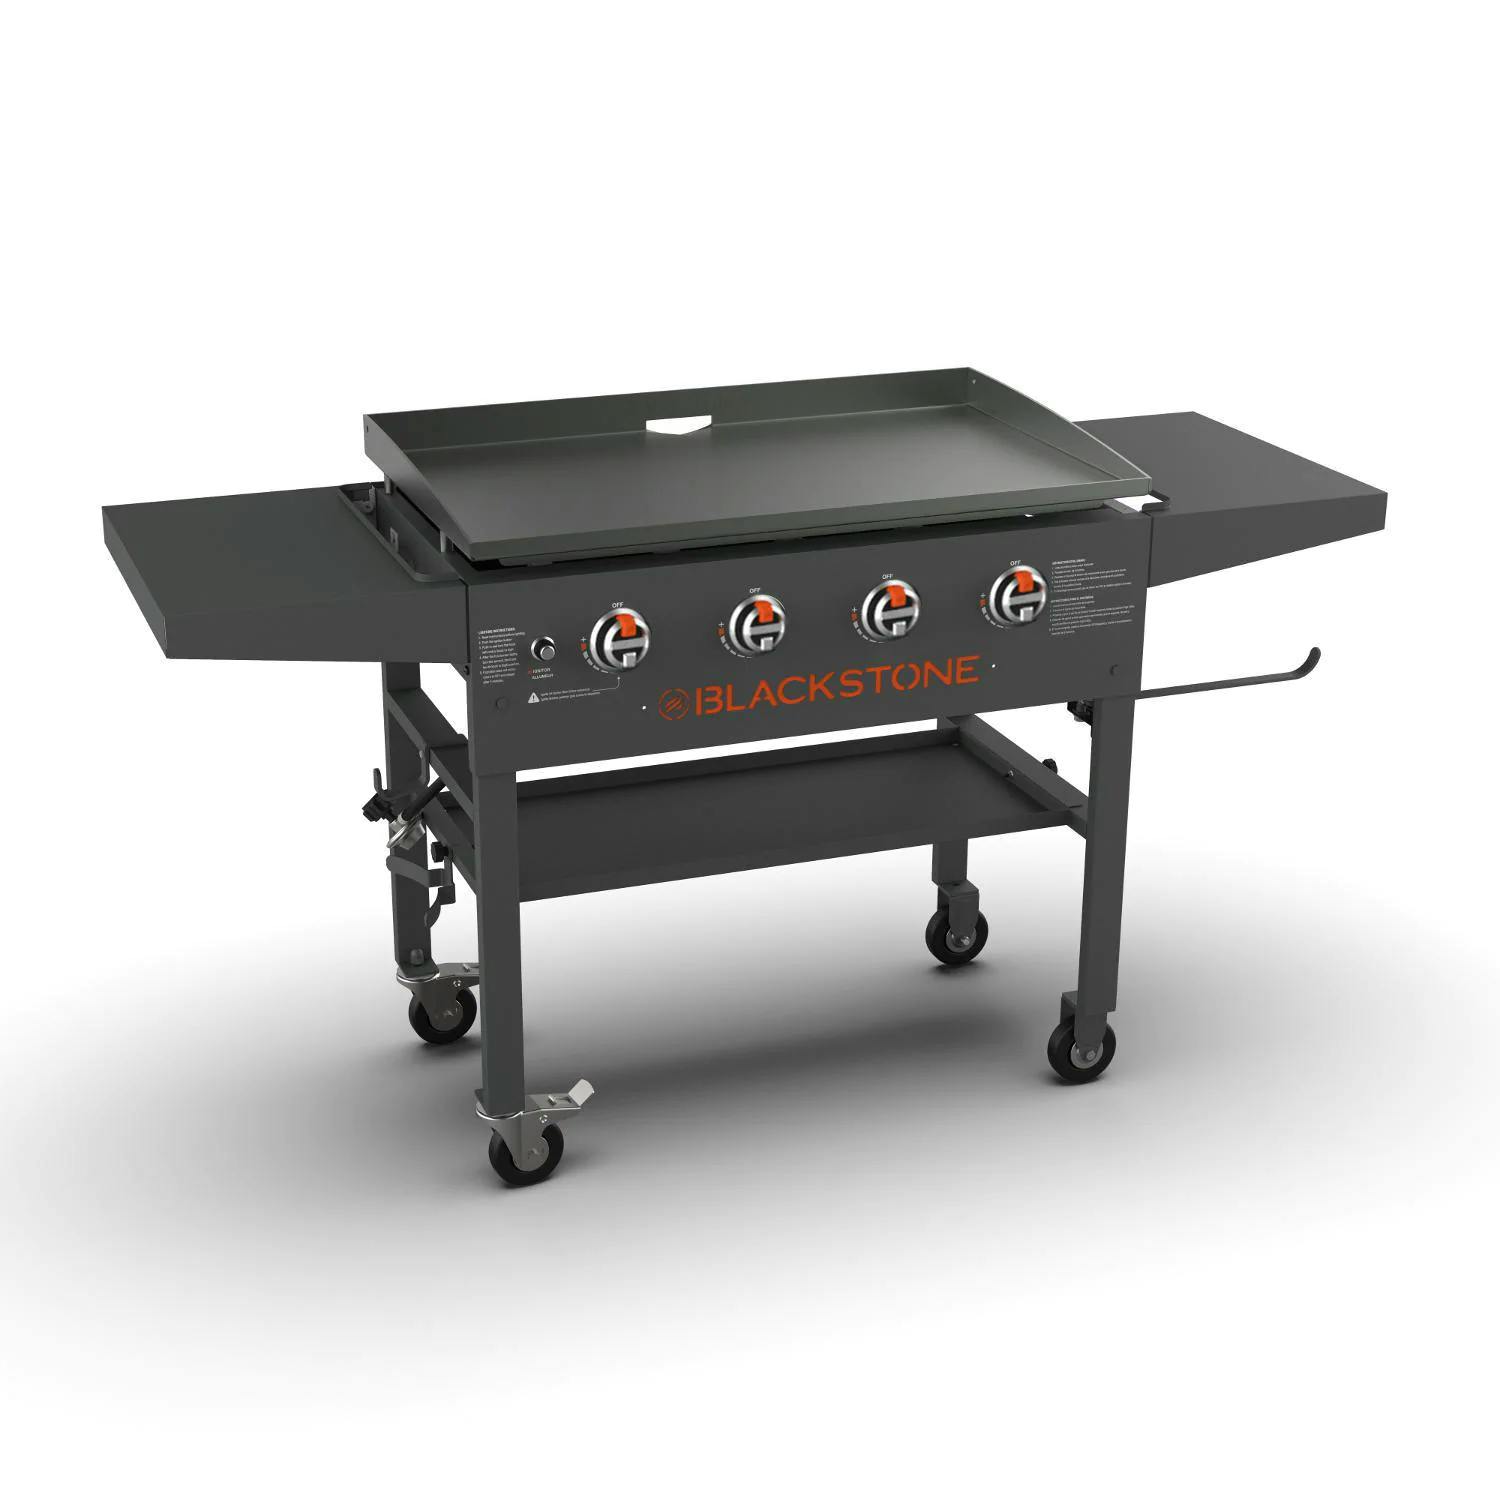 Blackstone Original Gas Griddle Cooking Station with Hard Cover